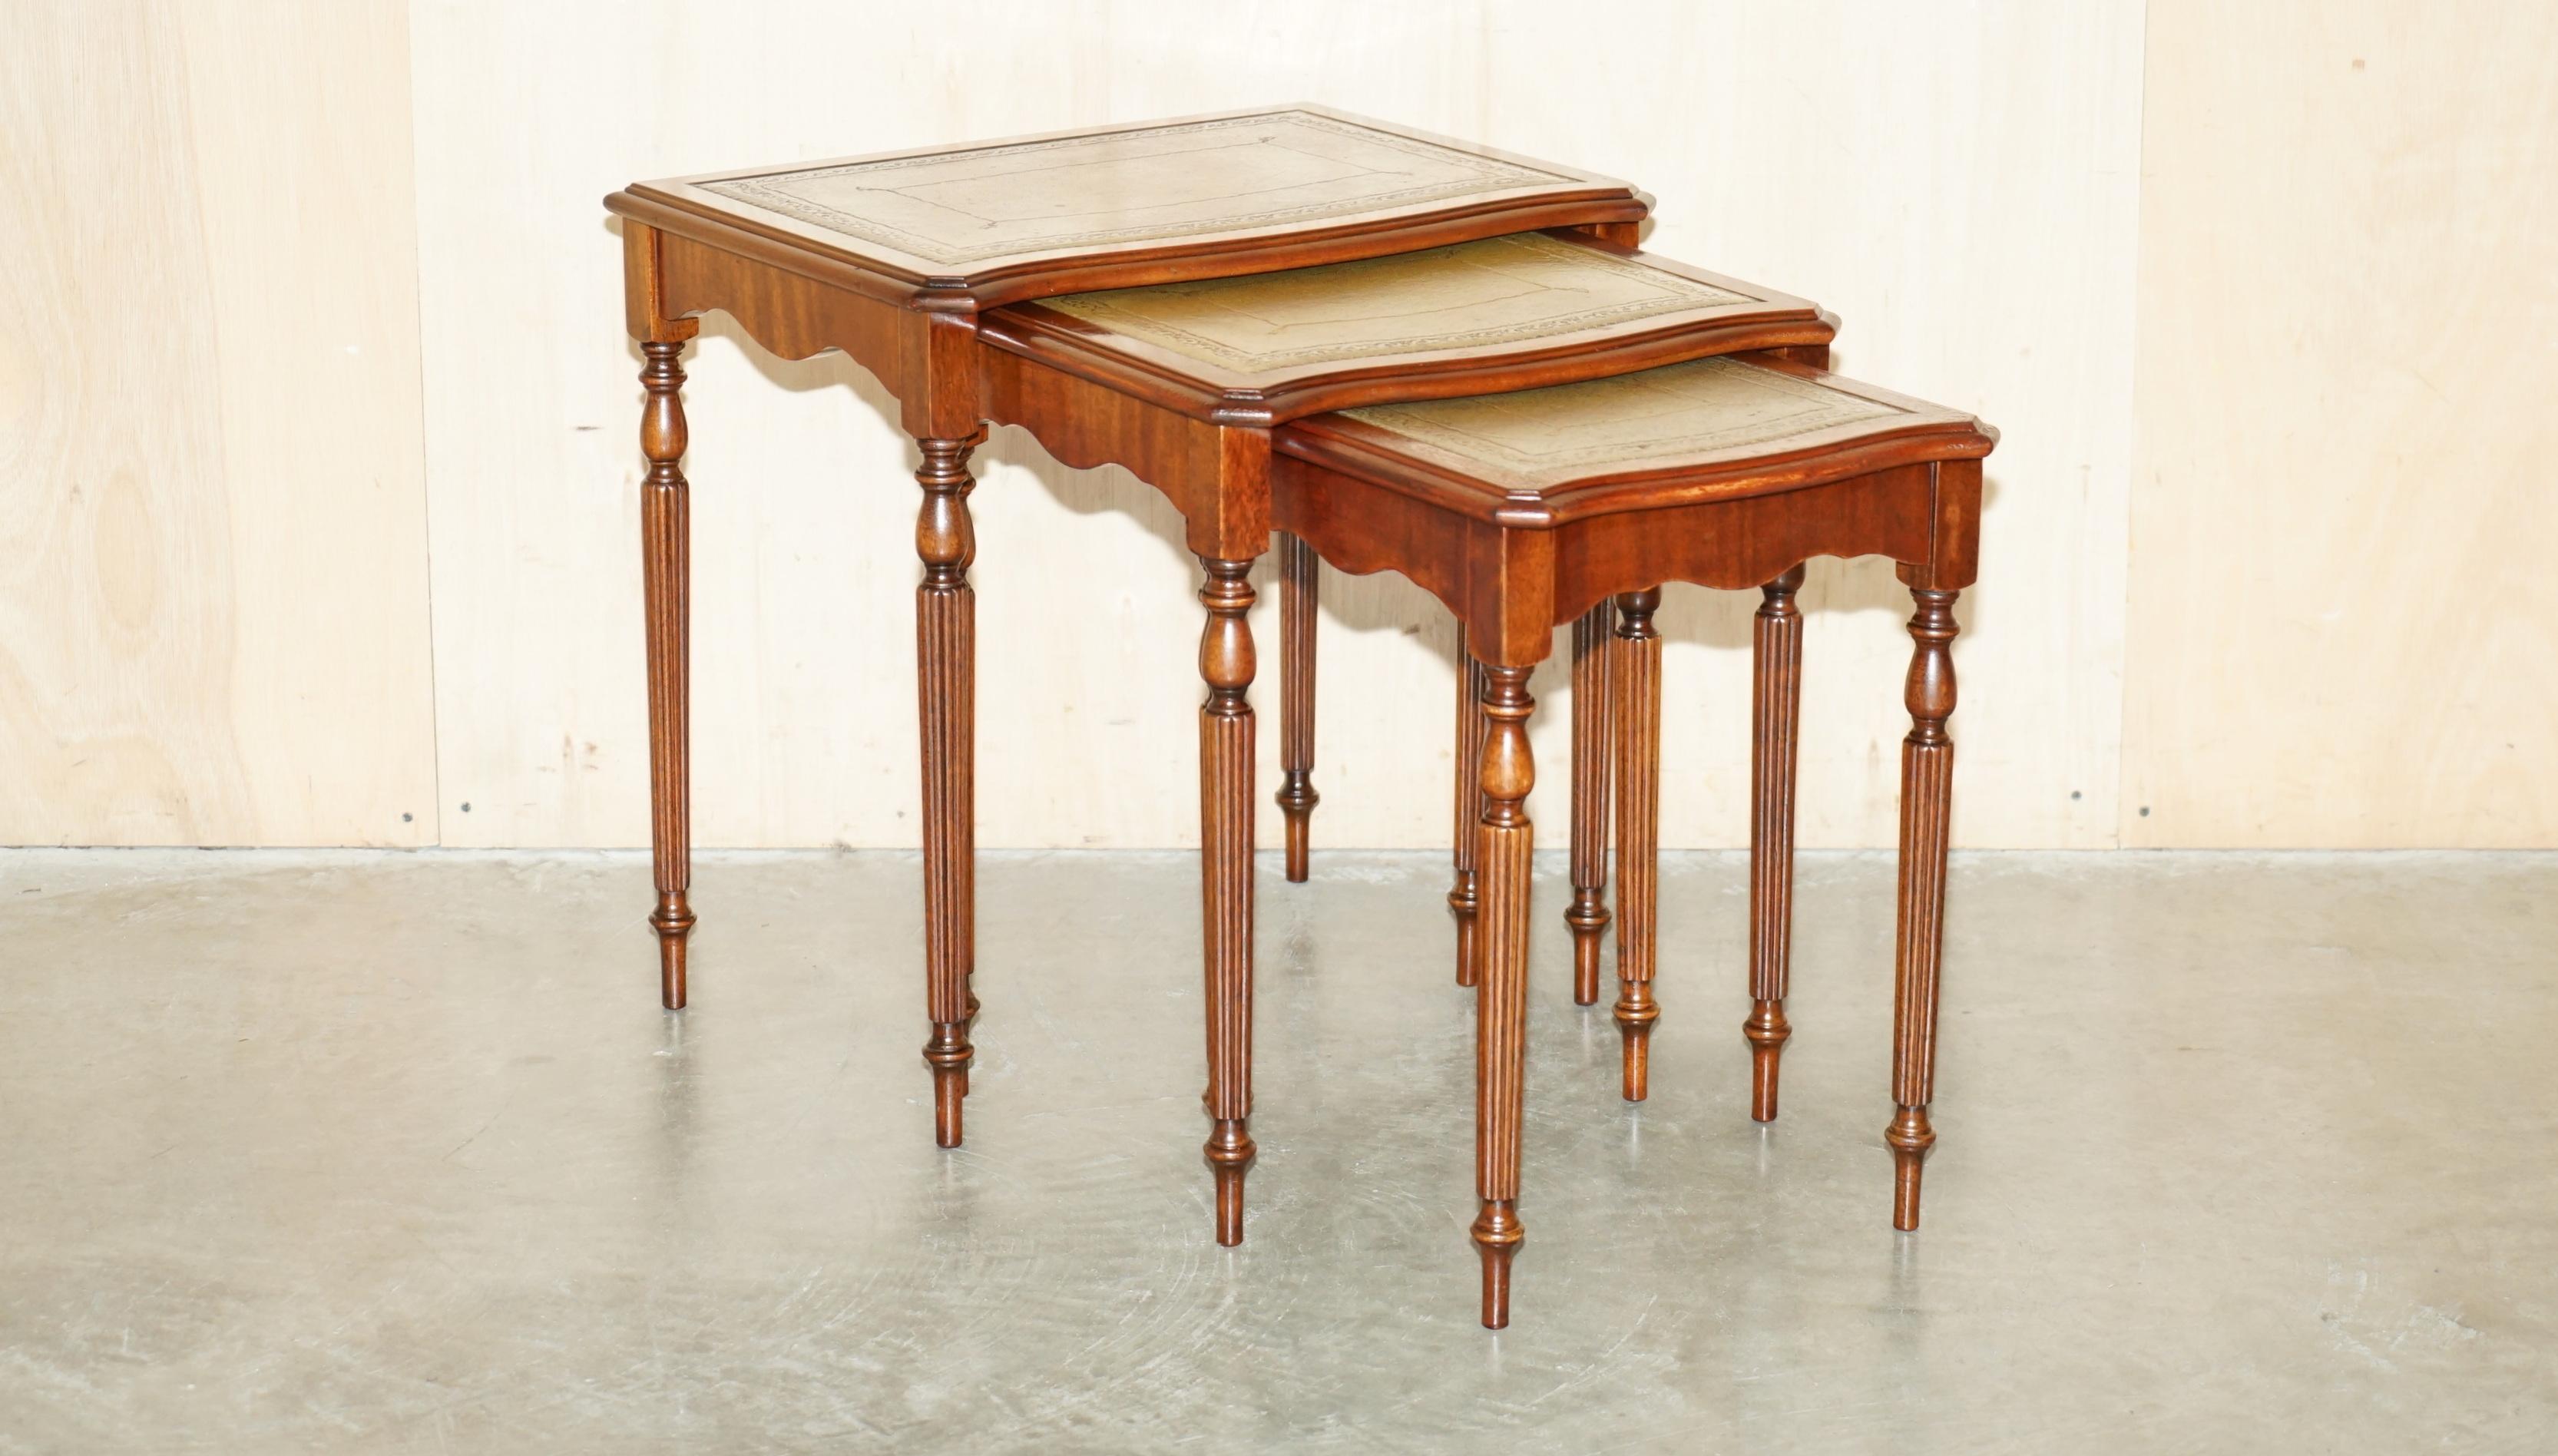 Royal House Antiques

Royal House Antiques is delighted to offer for sale this  lovely vintage nest of three hand made in England tables each with a Serpentine front and embossed green leather top 

Please note the delivery fee listed is just a